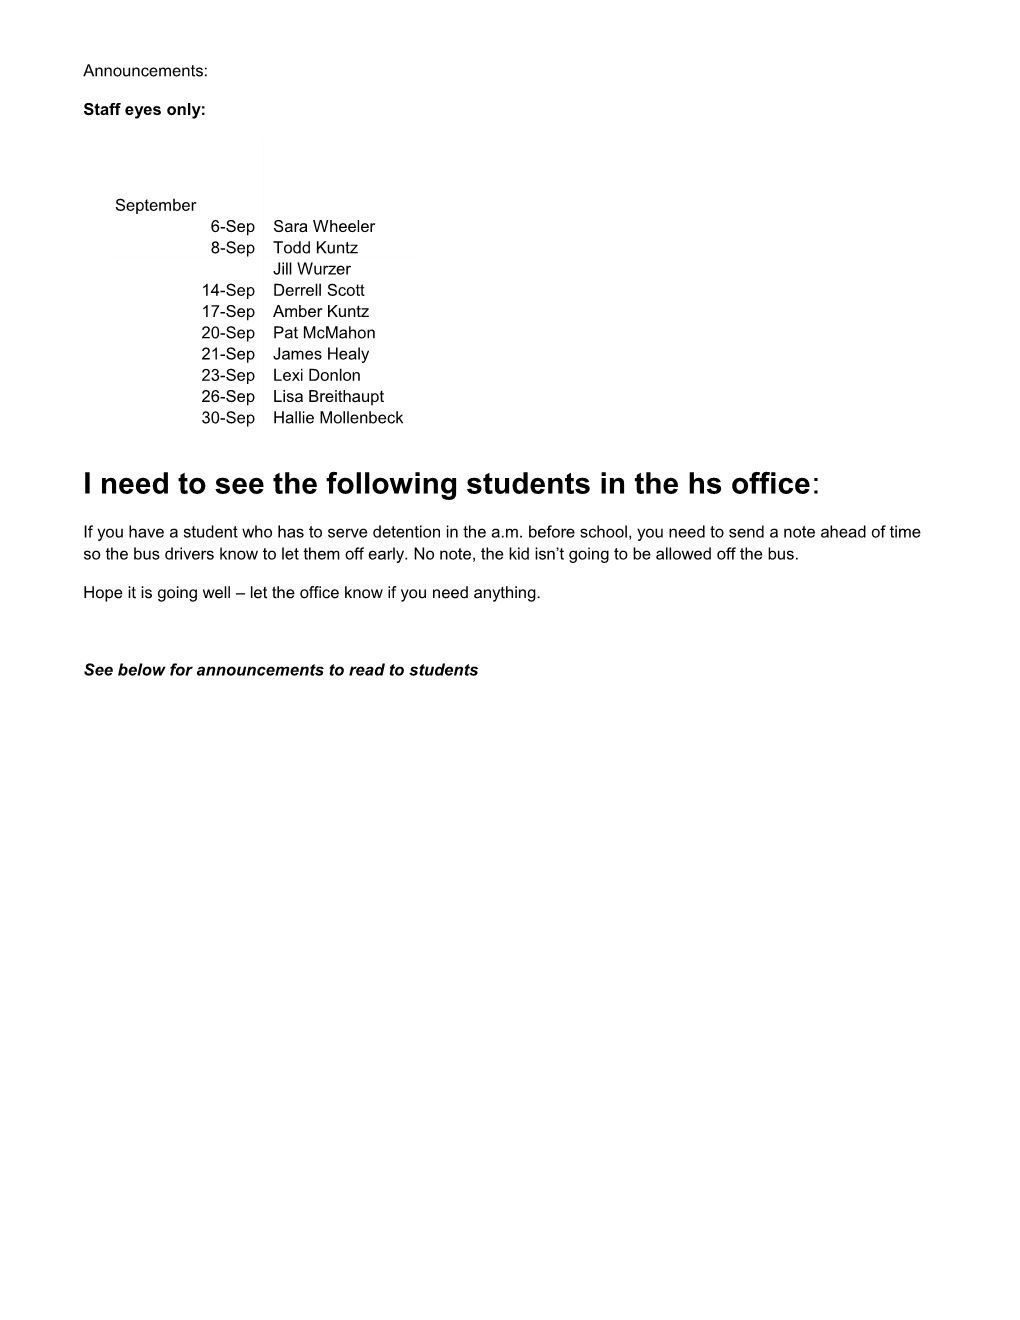 I Need to See the Following Students in the Hs Office